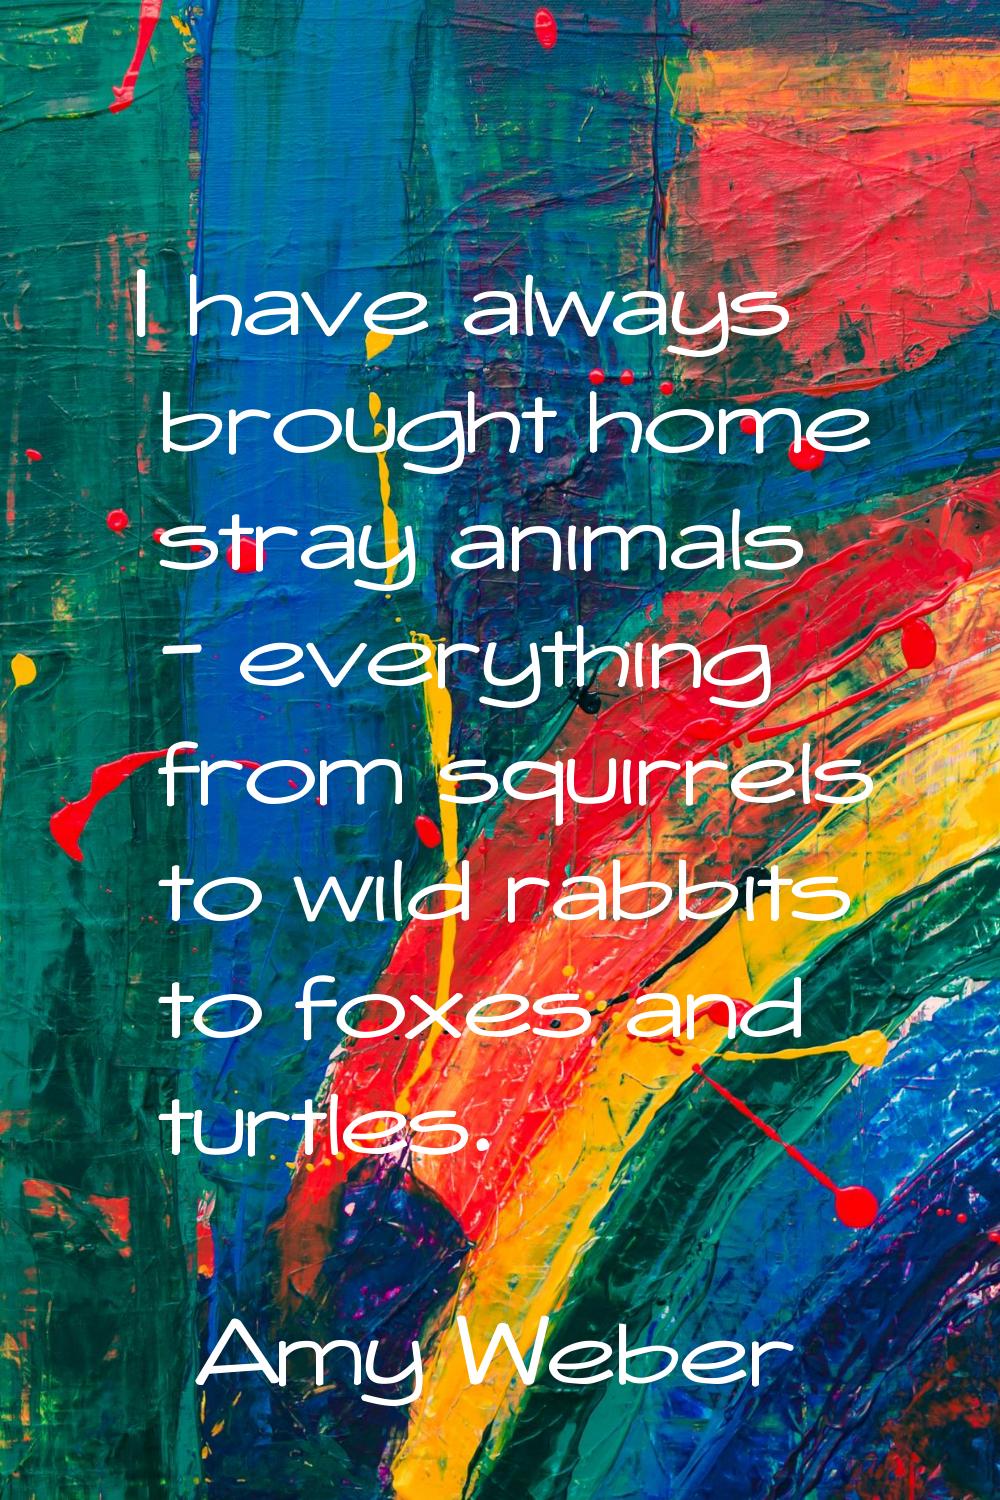 I have always brought home stray animals - everything from squirrels to wild rabbits to foxes and t